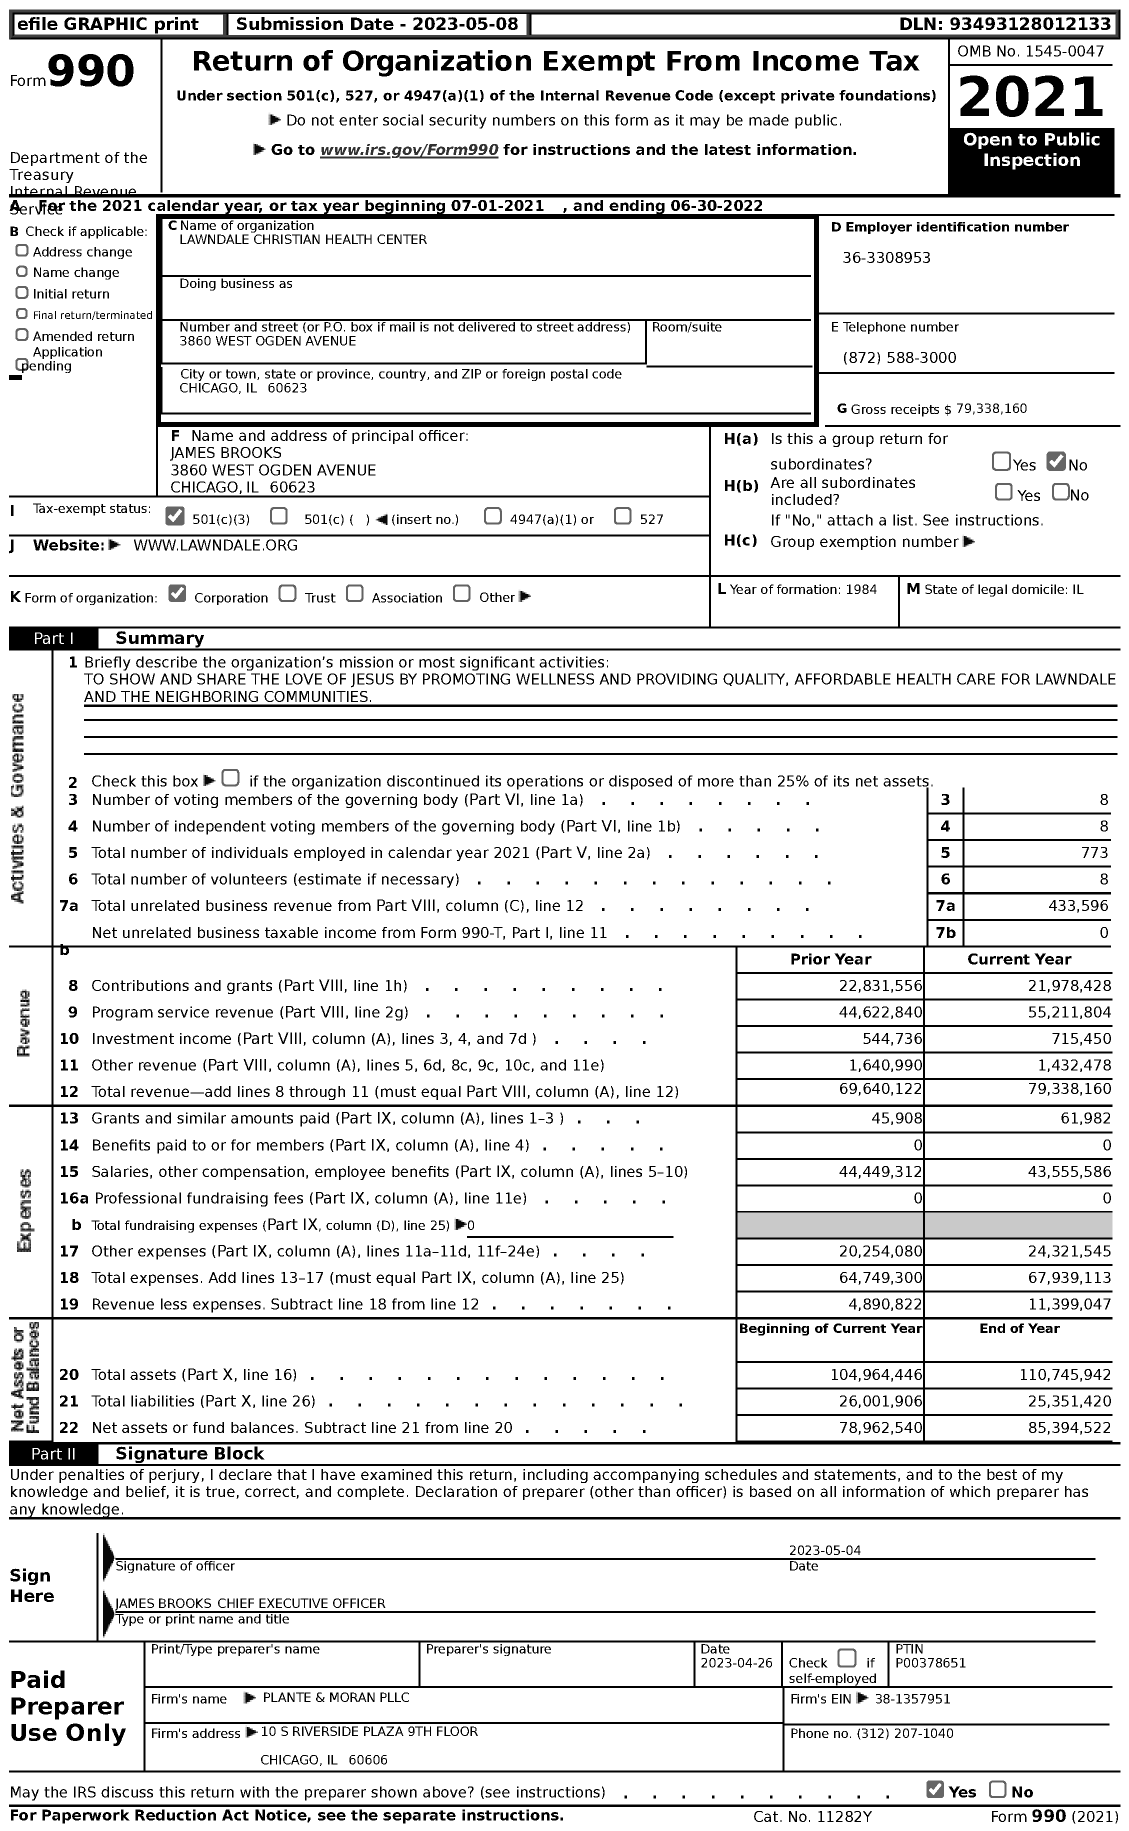 Image of first page of 2021 Form 990 for Lawndale Christian Health Center (LCHC)